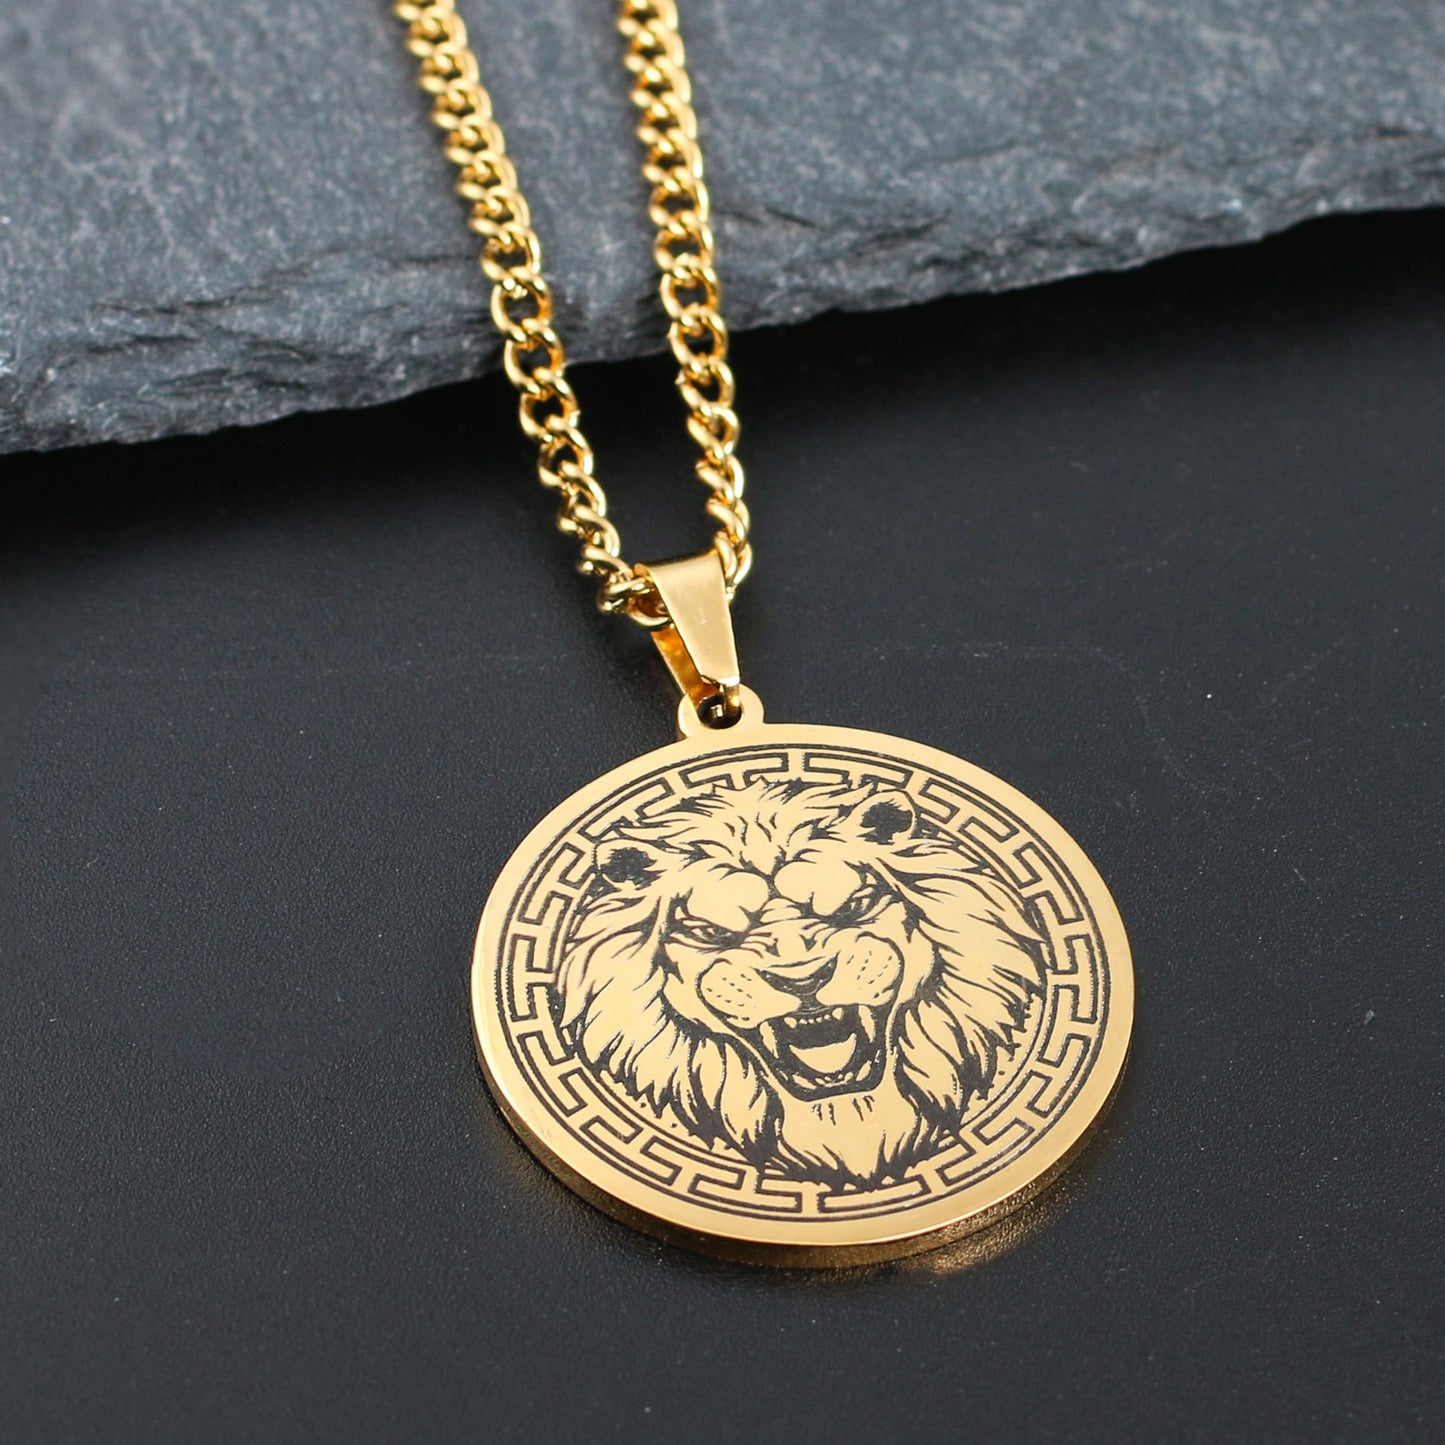 DOOYIO Bear Wolf Tiger Lion Animal Pendant Necklace Stainless Steel Statement Box Chain Male Men Necklaces Jewelry